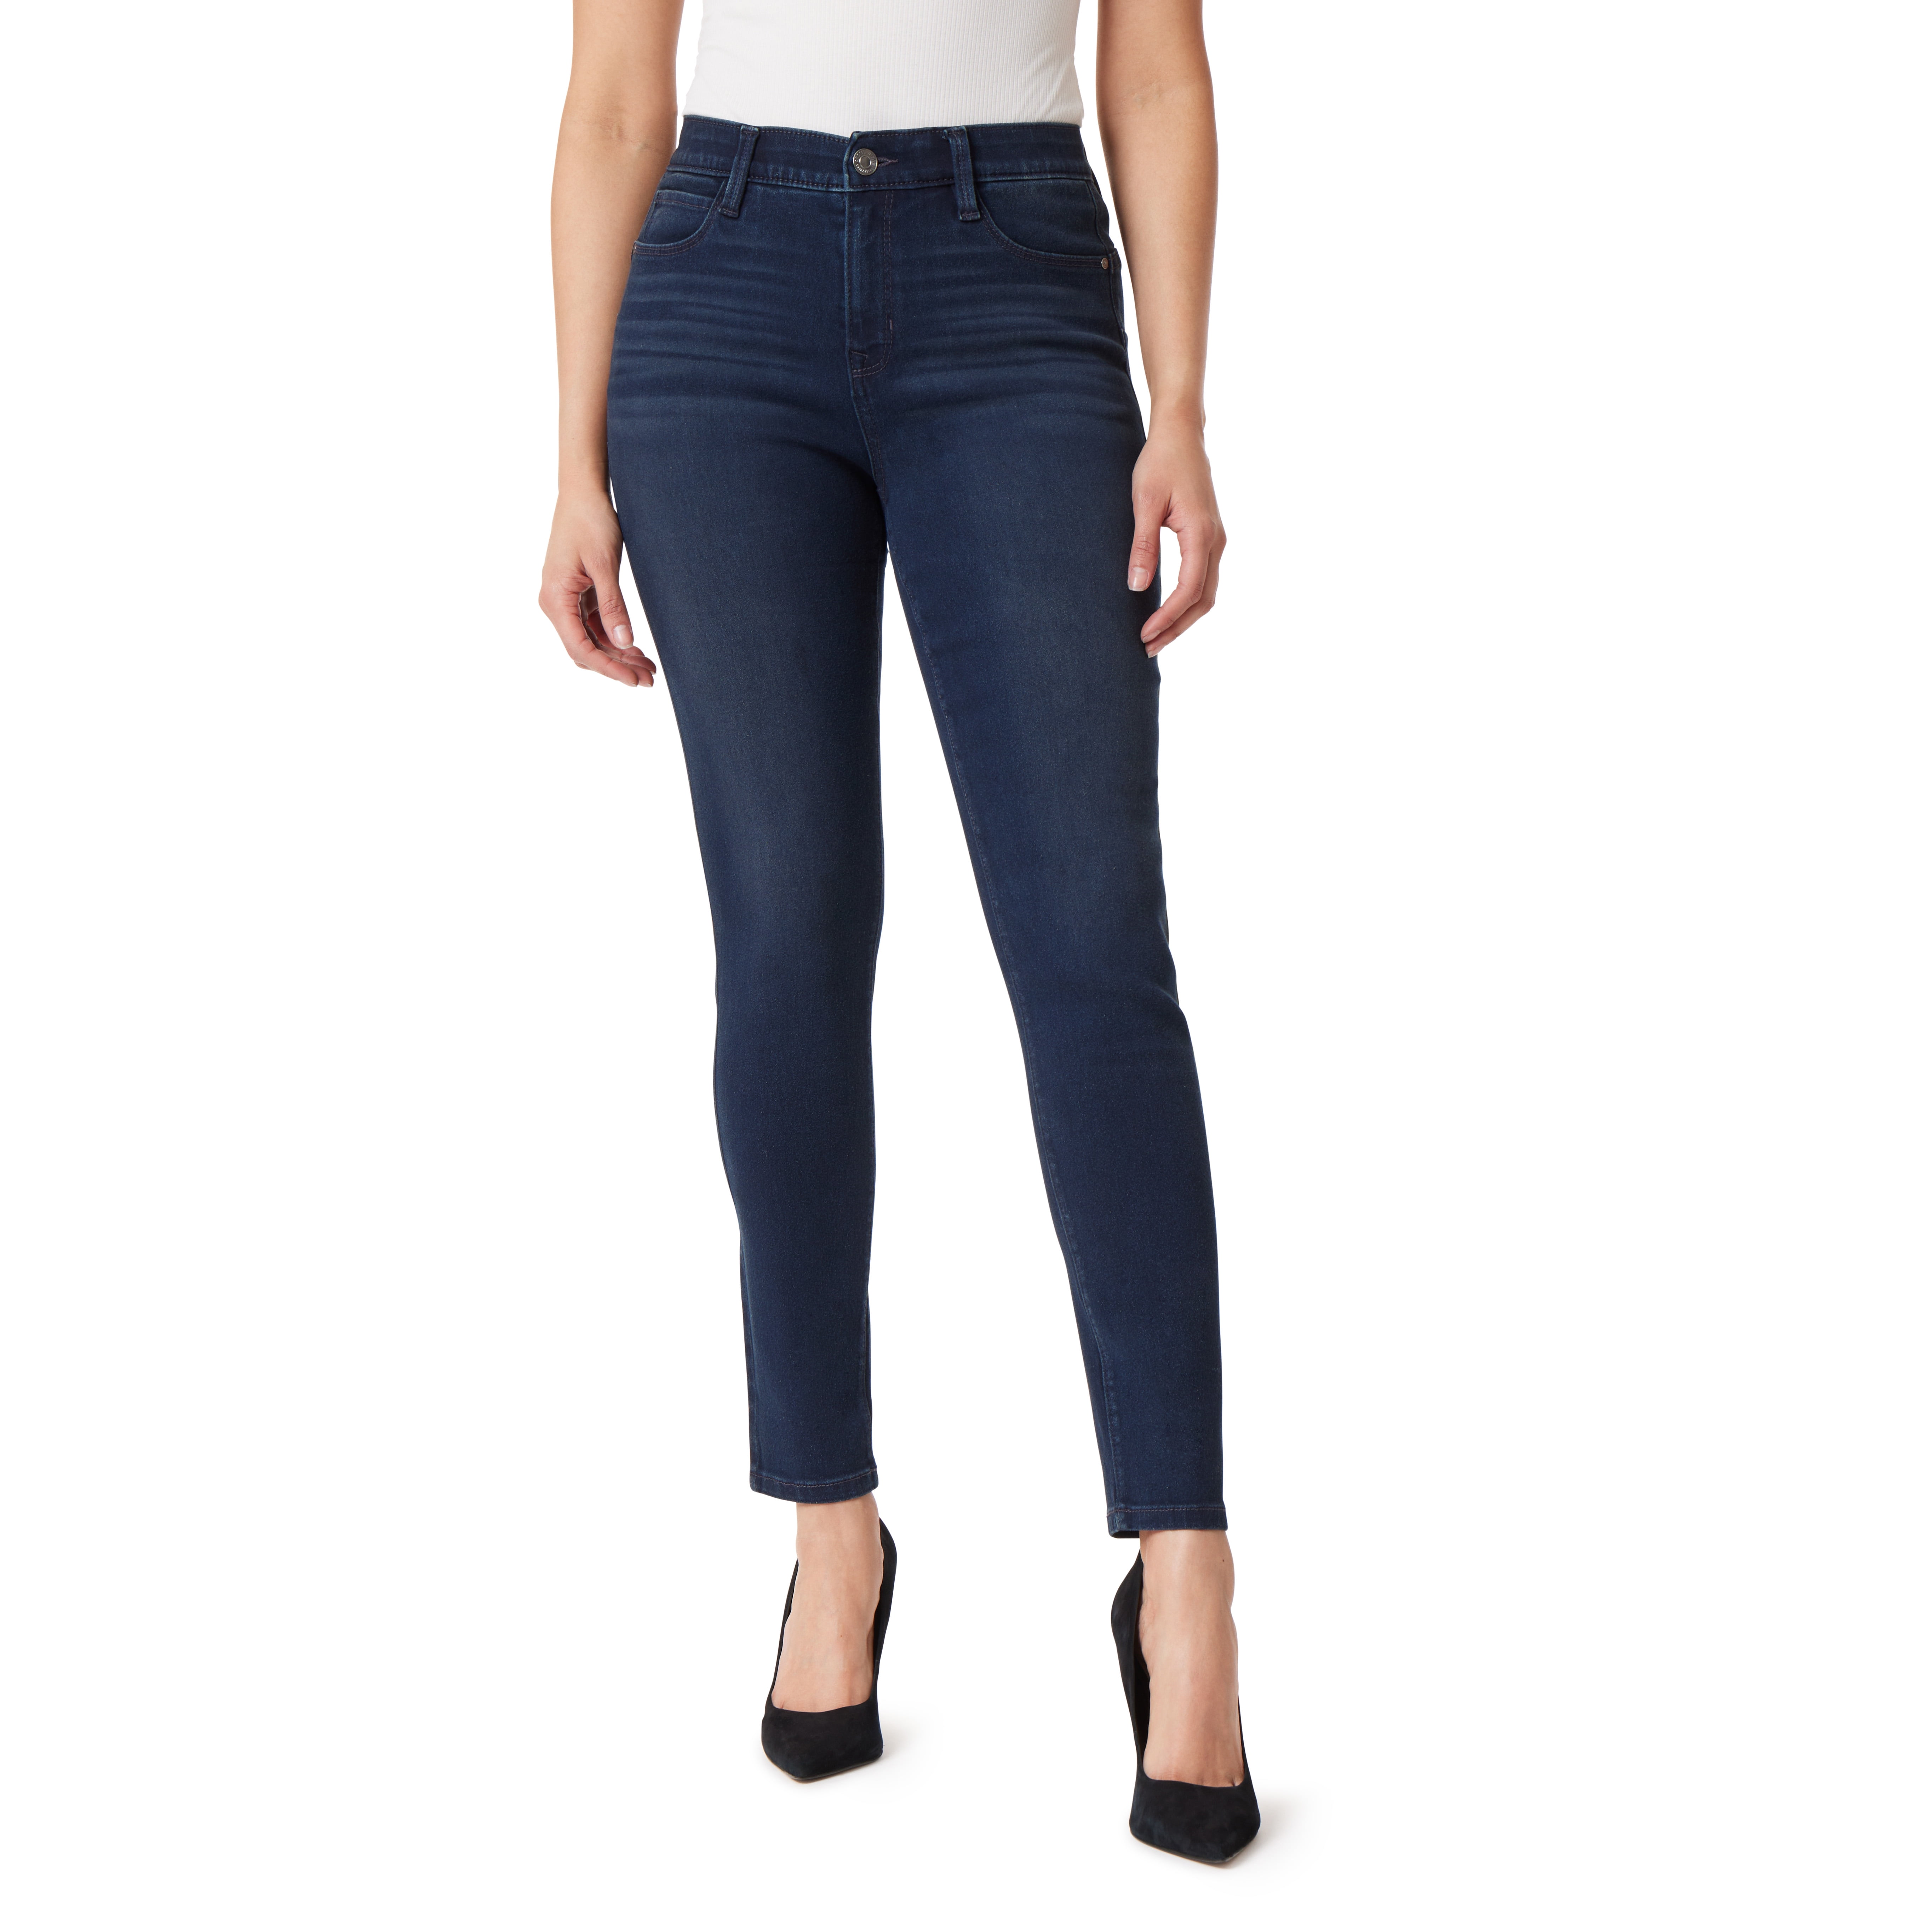 Angels Forever Young Women's Jeanie Lift Skinny Jeans - Walmart.com